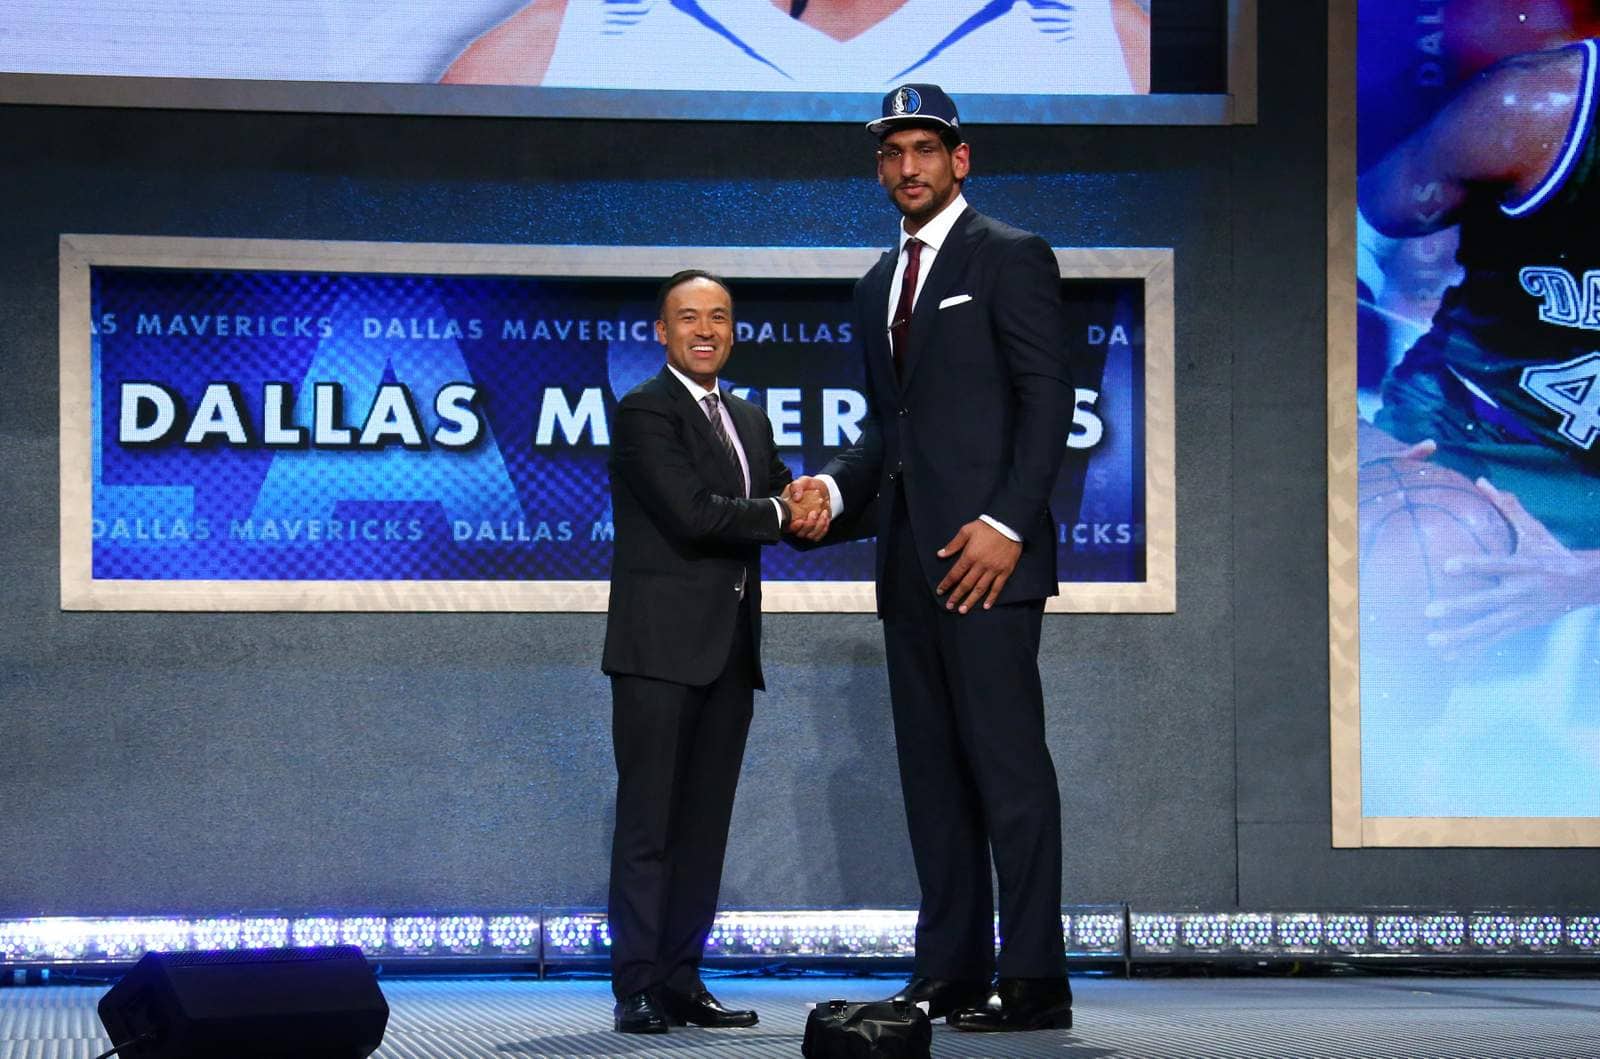 Satnam Singh 6 9 tall grandma and other extraordinary facts about Indias first NBA player